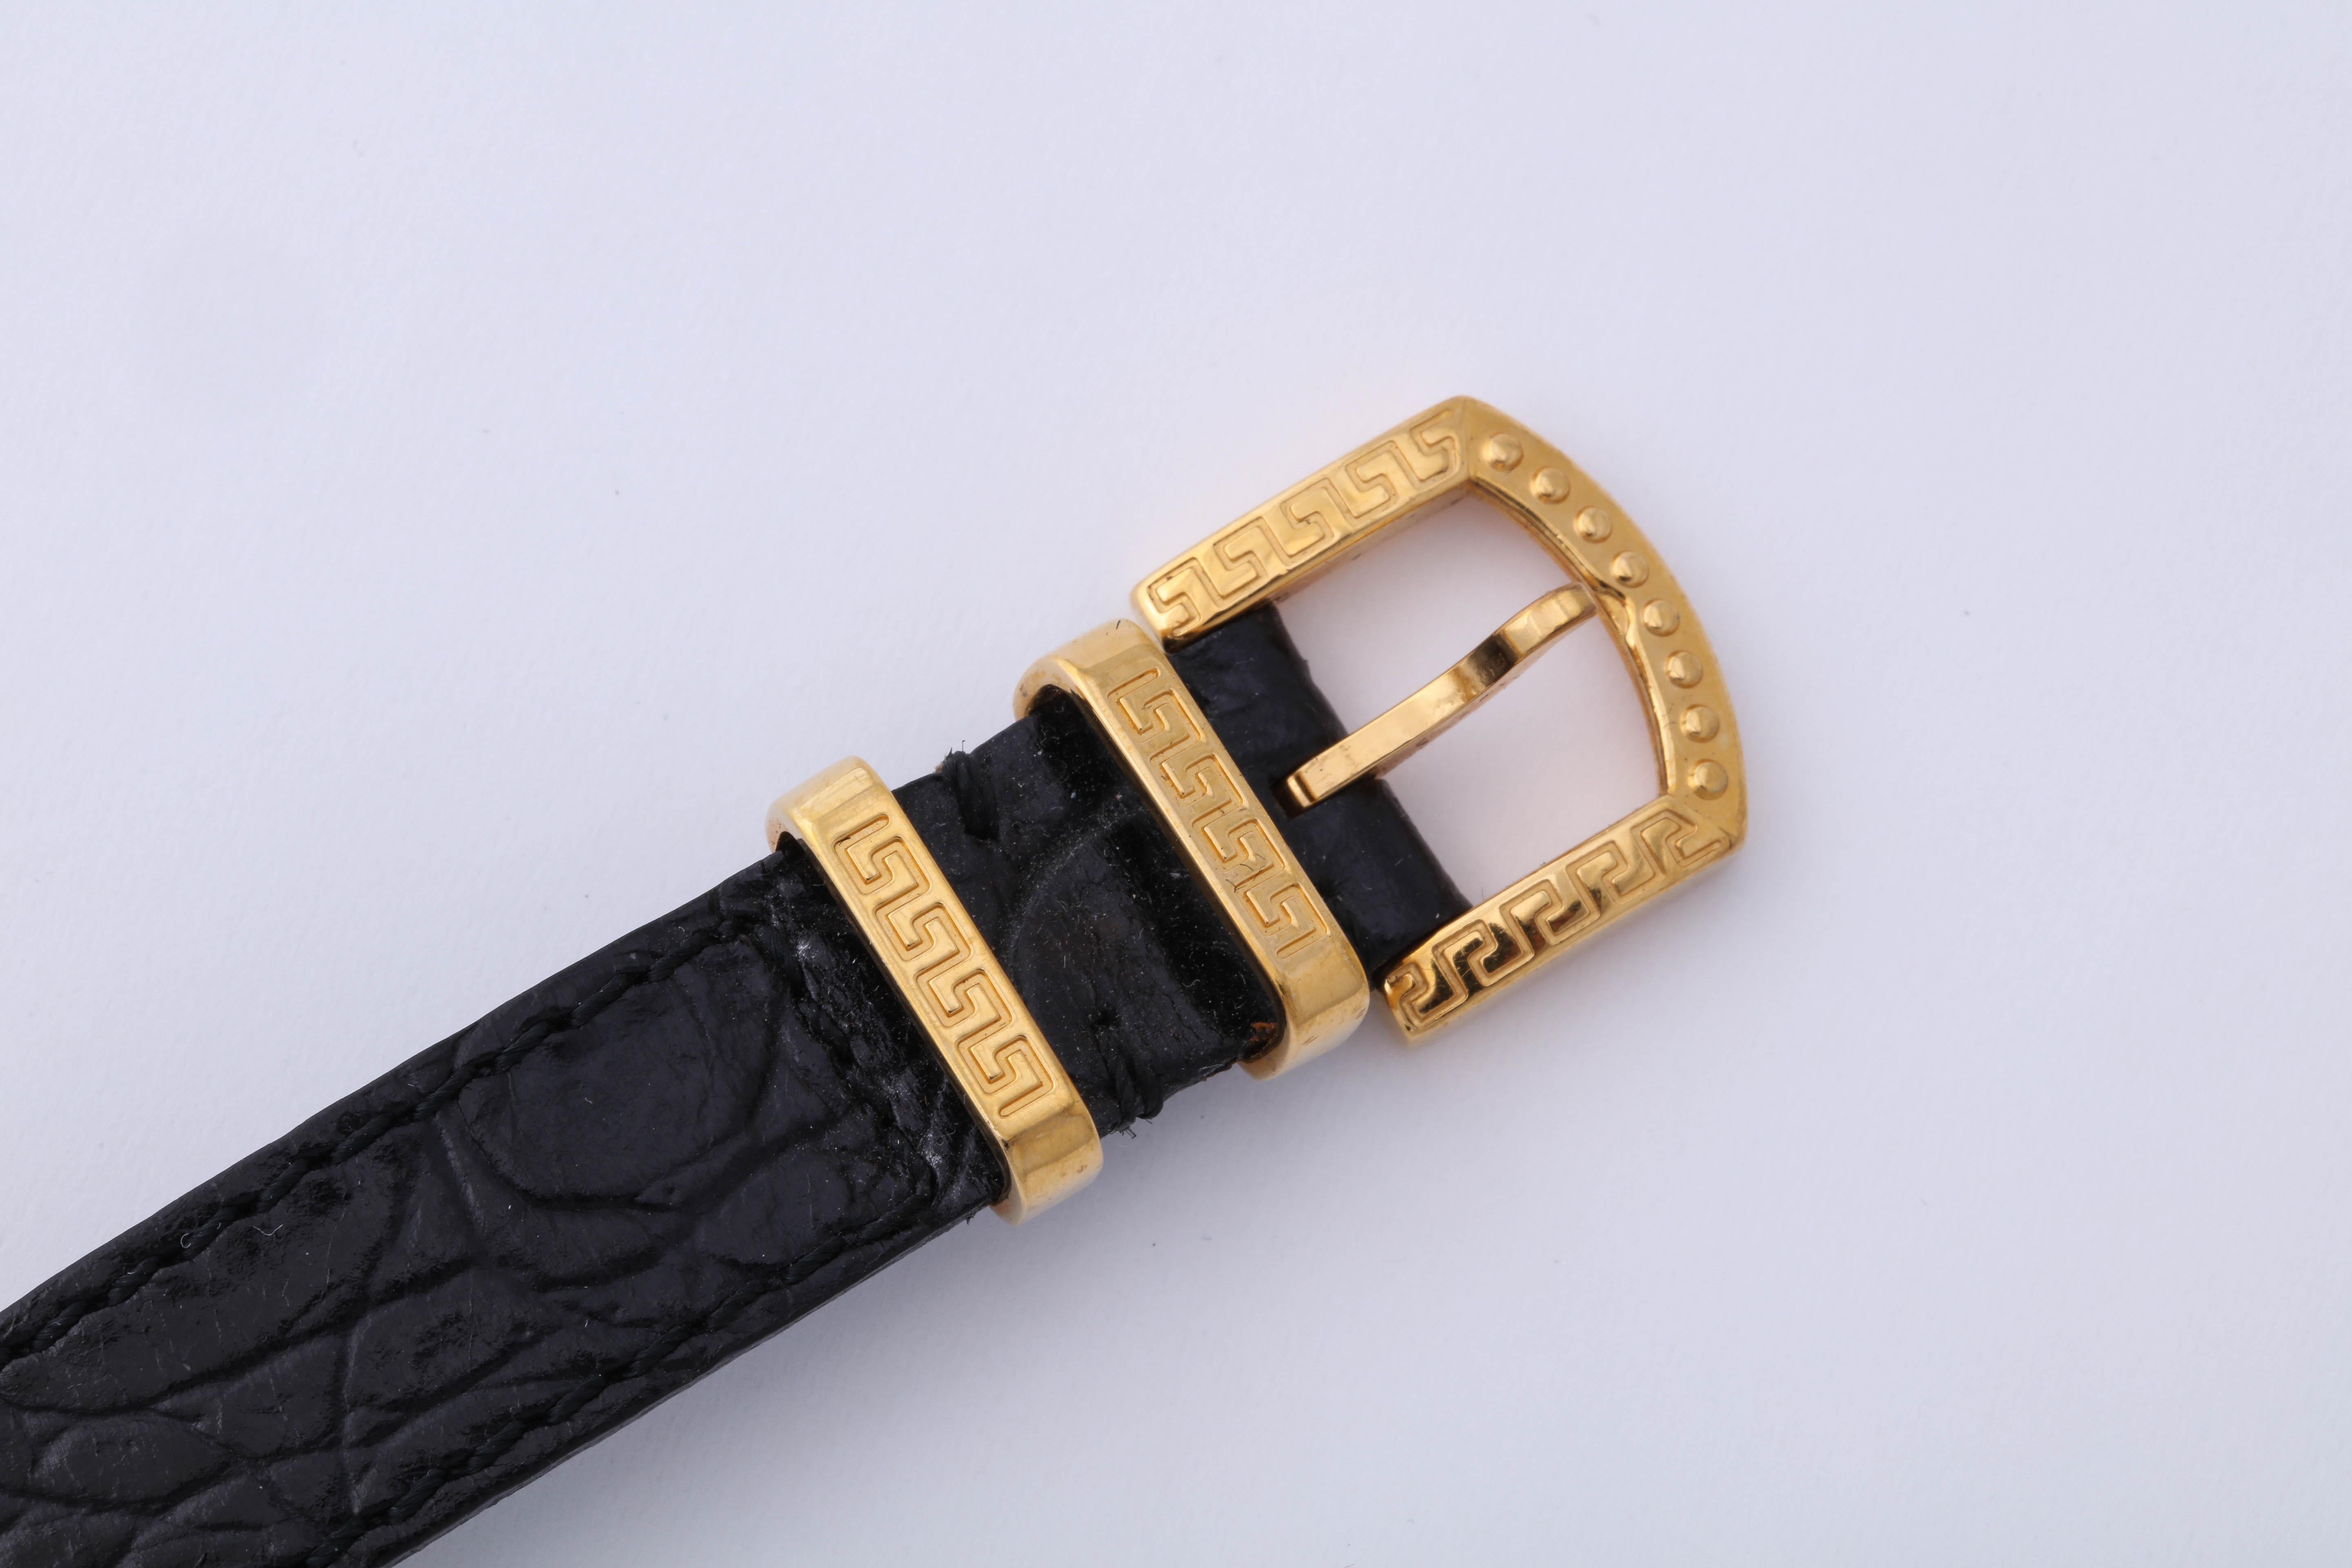   Gianni Versace Medusa Watch with Black Belt  In Good Condition For Sale In Chicago, IL